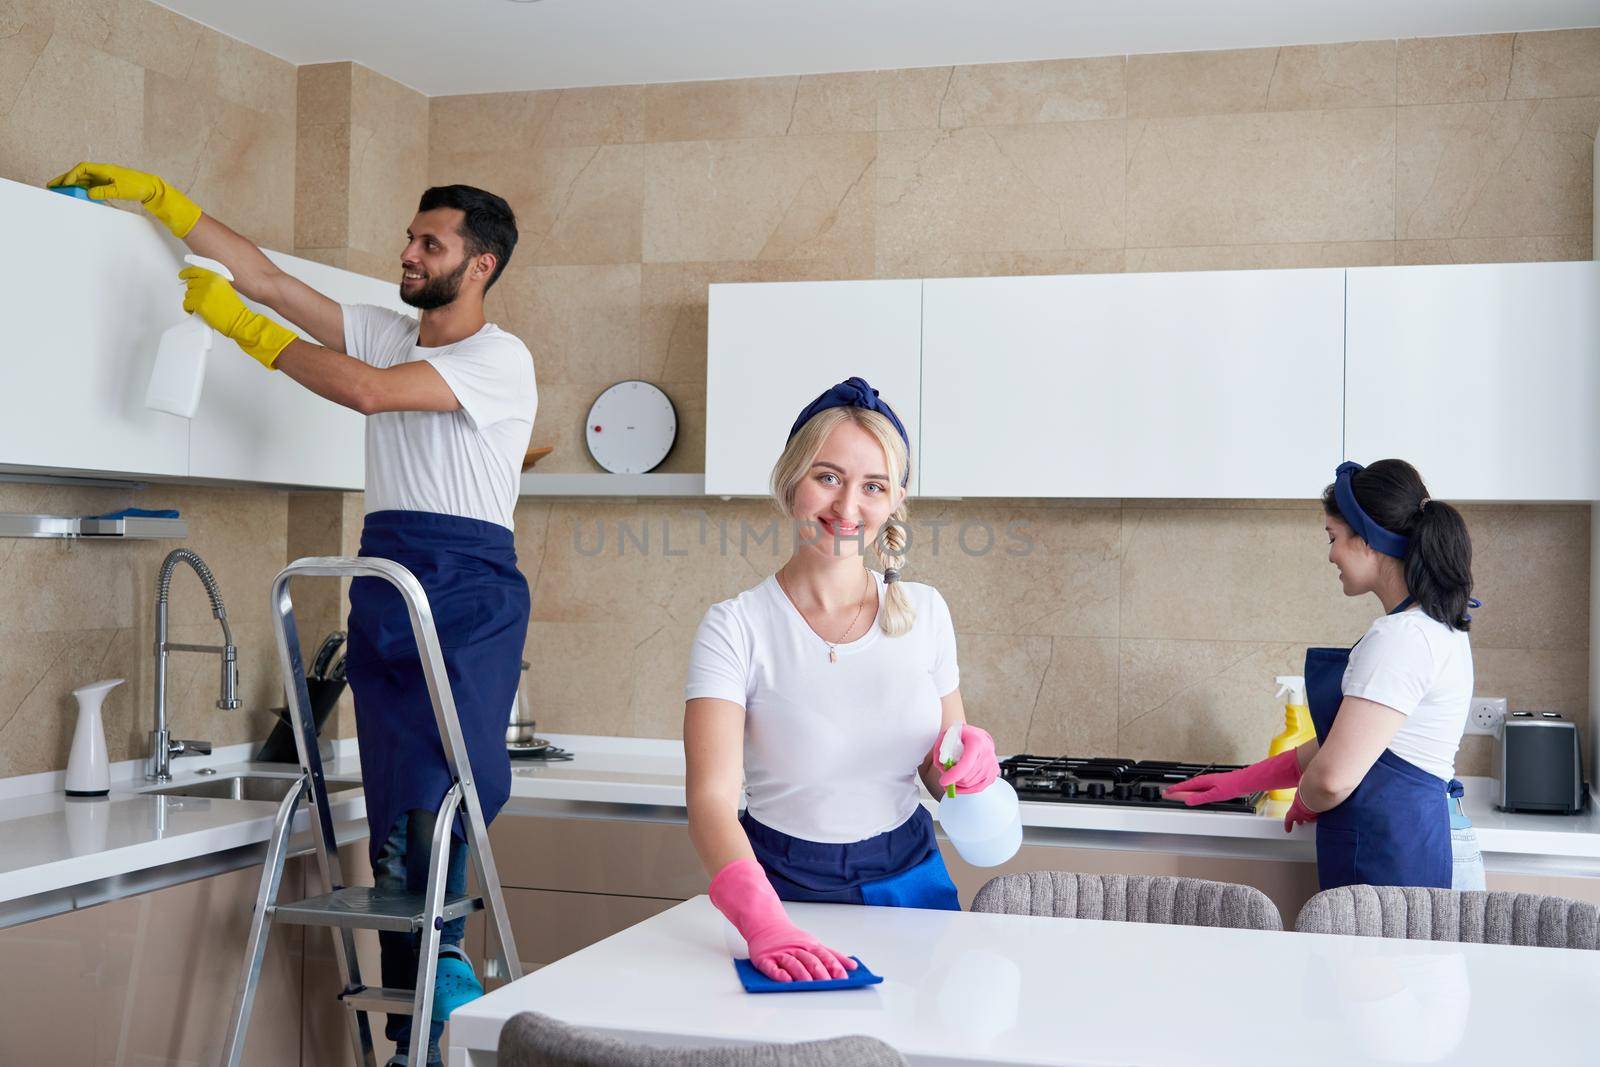 Cleaning service team at work in kitchen in private home by Mariakray